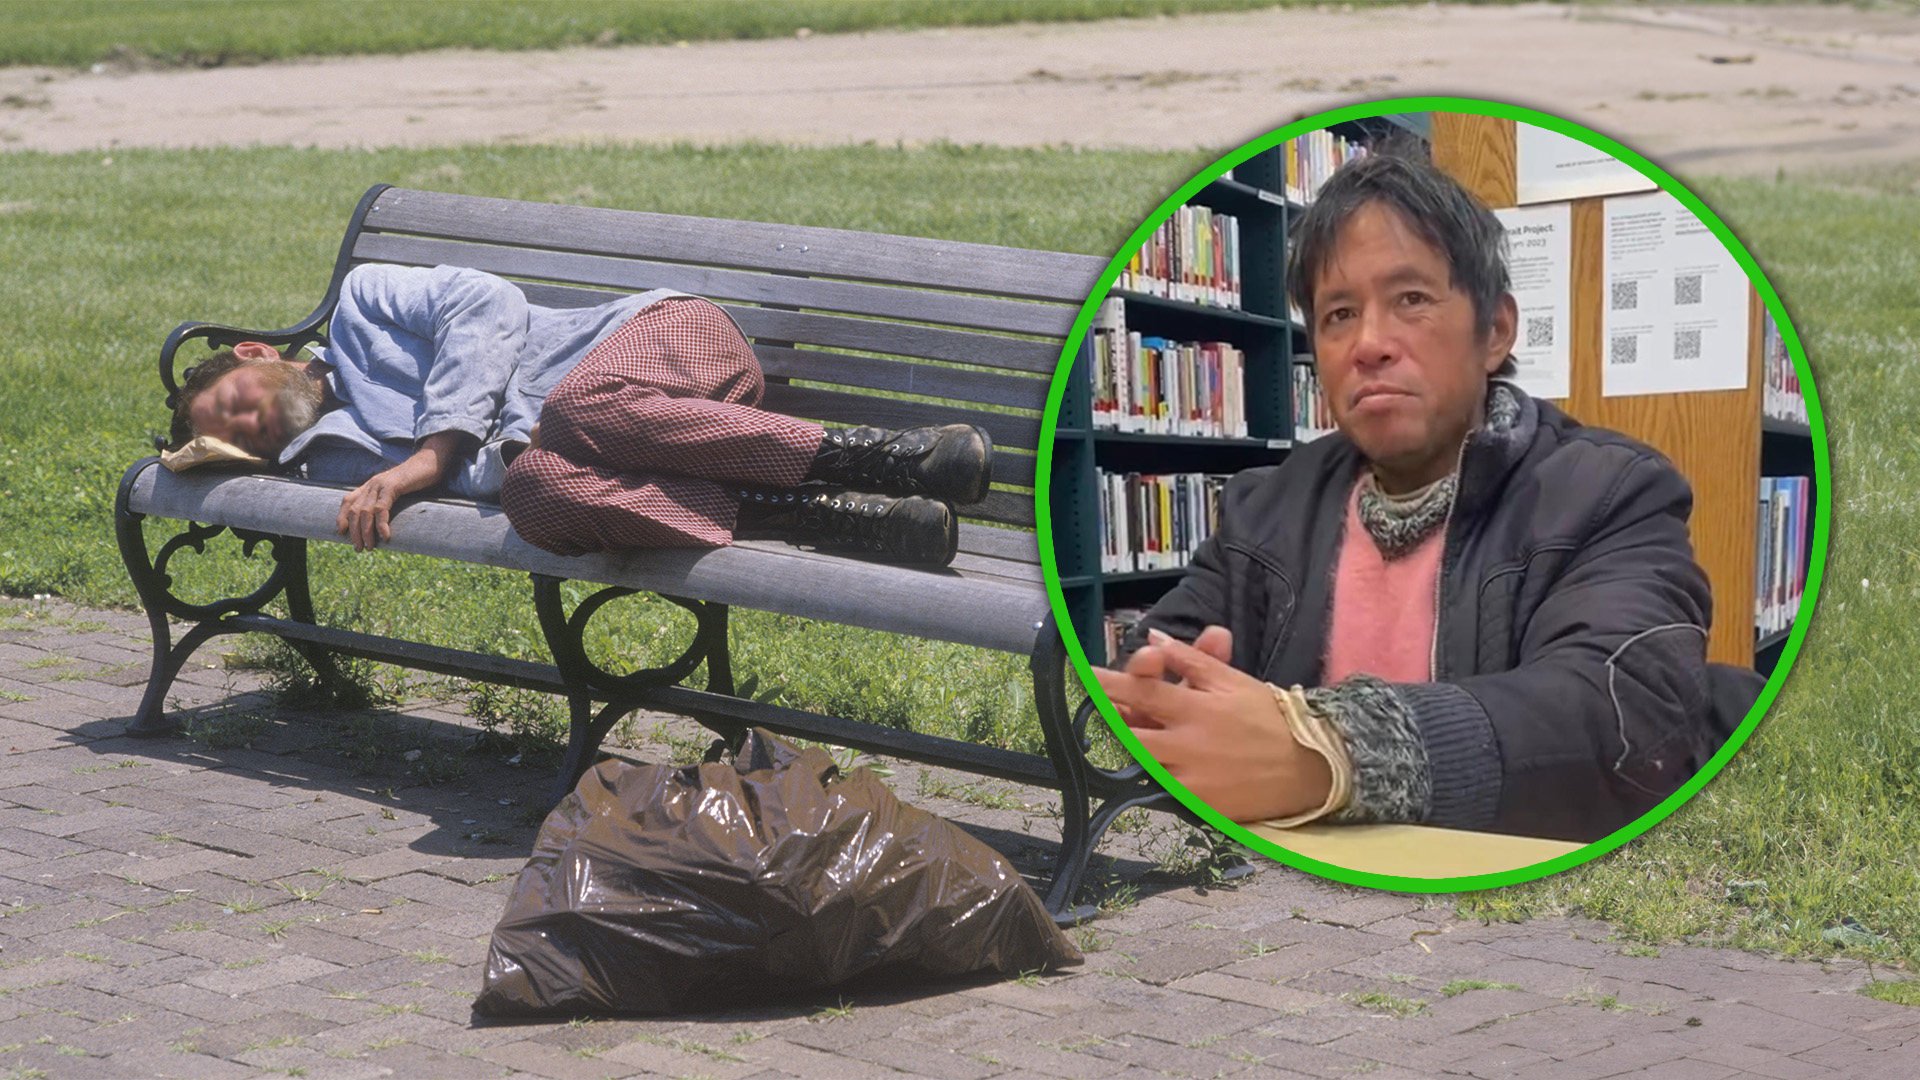 A highly-educated man from China whose life in the United States spiralled out of control following a messy divorce, and who has been sleeping rough on the streets of New York for 16 years, could be on his way back to the mainland after his story went viral on social media. Photo: SCMP composite/Shutterstock/Baidu 